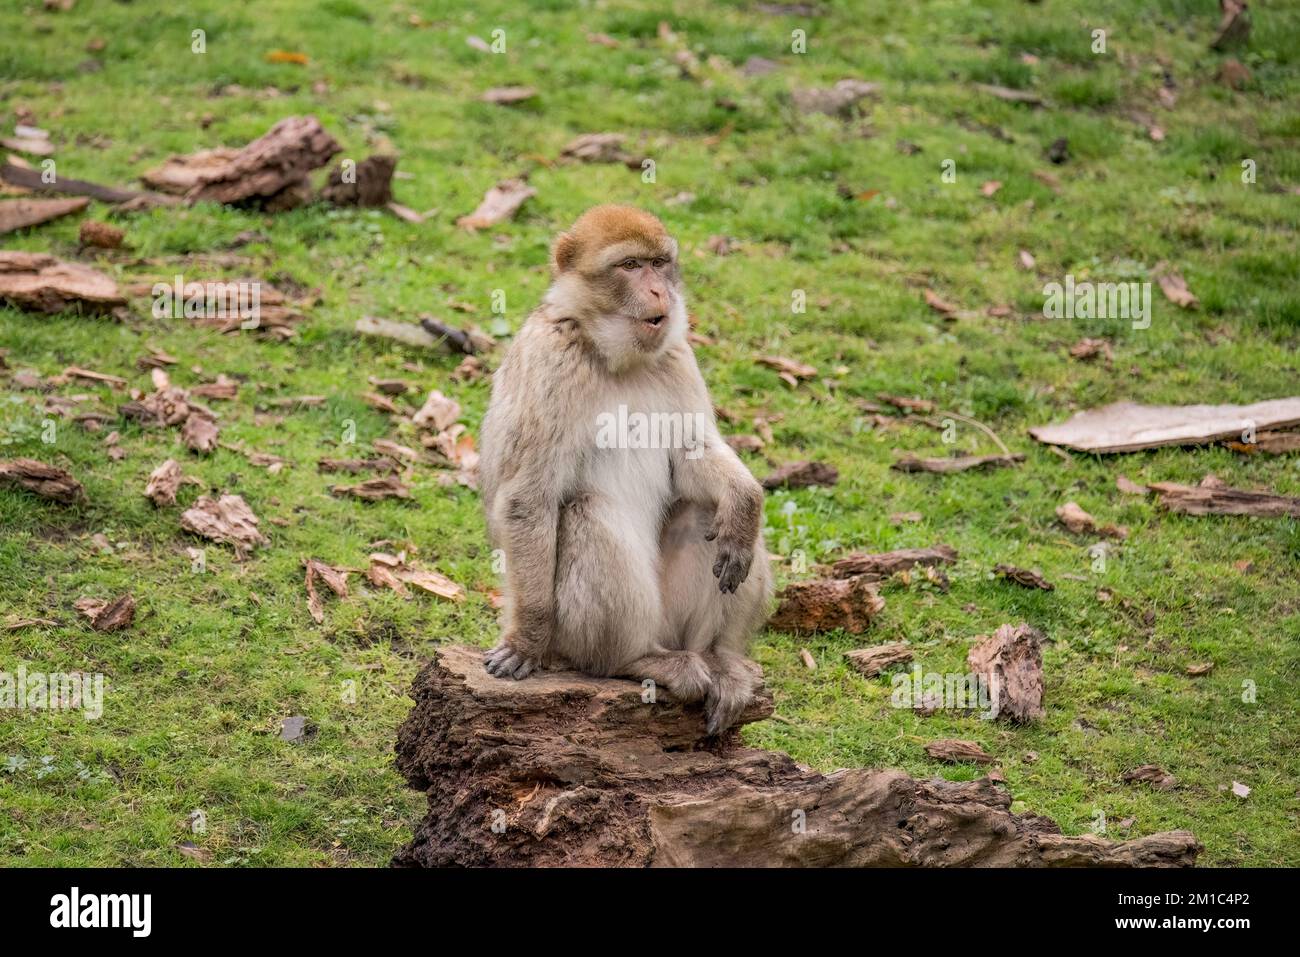 A furry little white macaque monkey with a shocked expression in a sunny green field Stock Photo